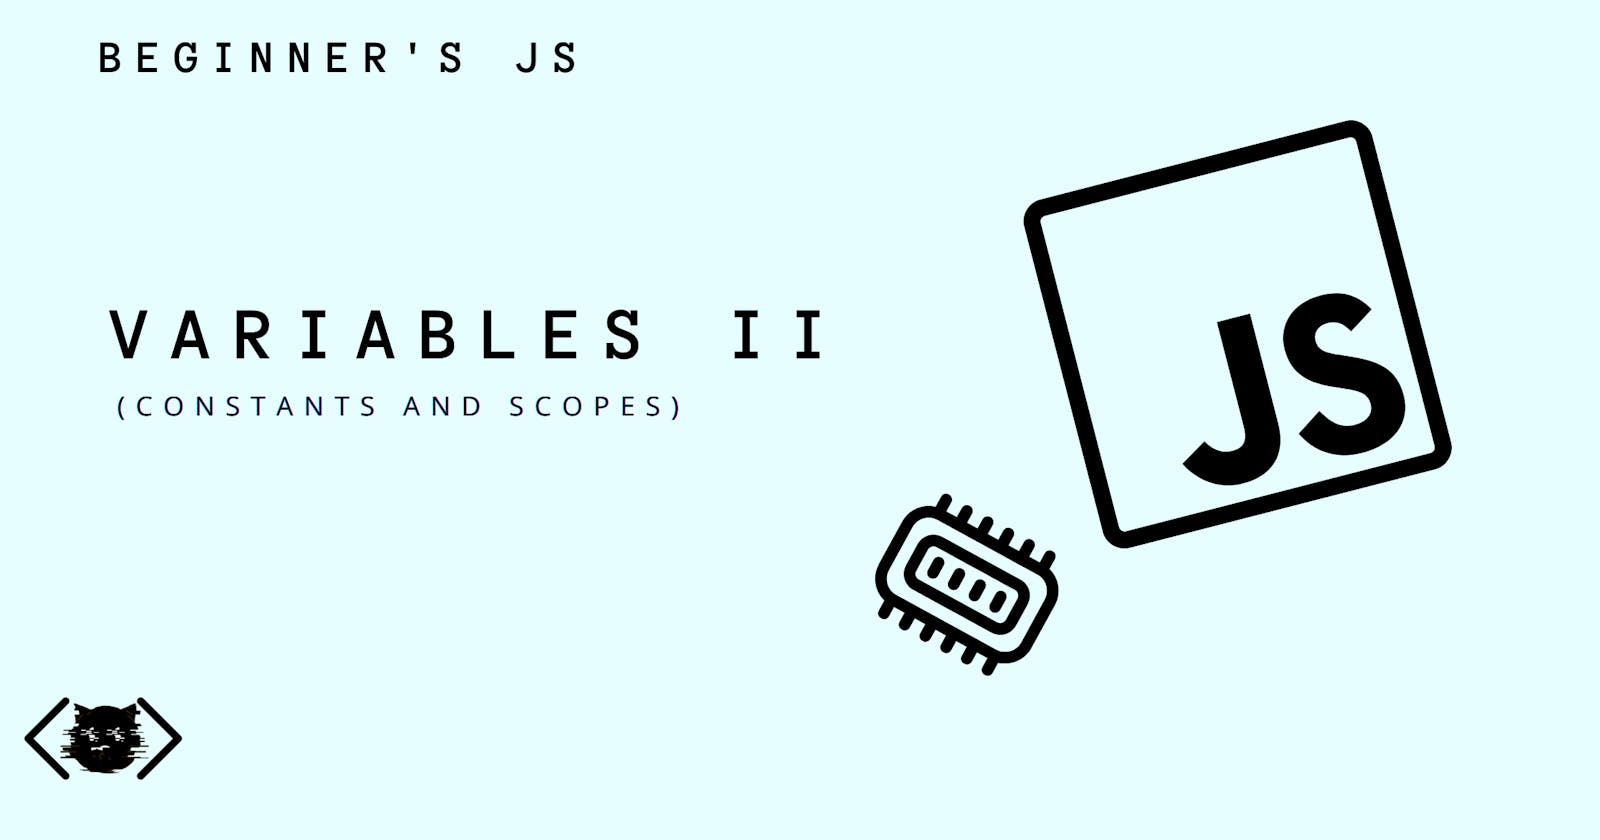 Variables II (Constants and Scopes) - Beginner's JS